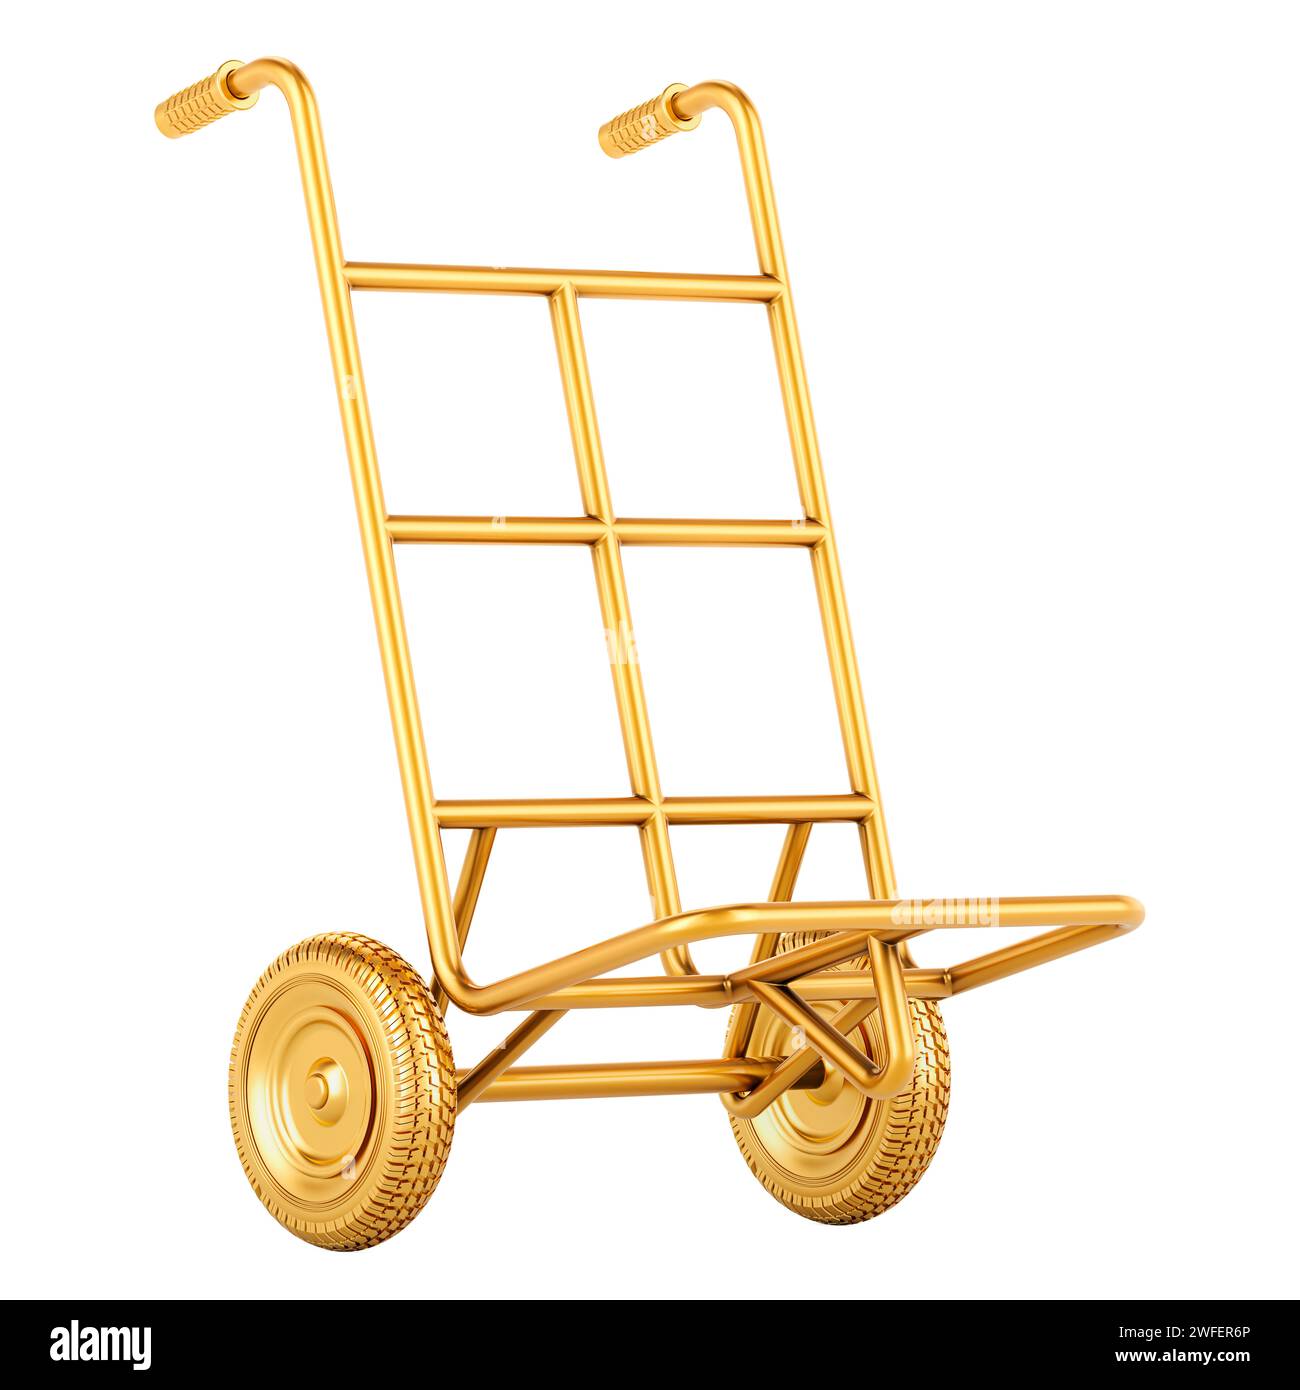 Golden Hand Truck, 3D rendering isolated on white background Stock Photo